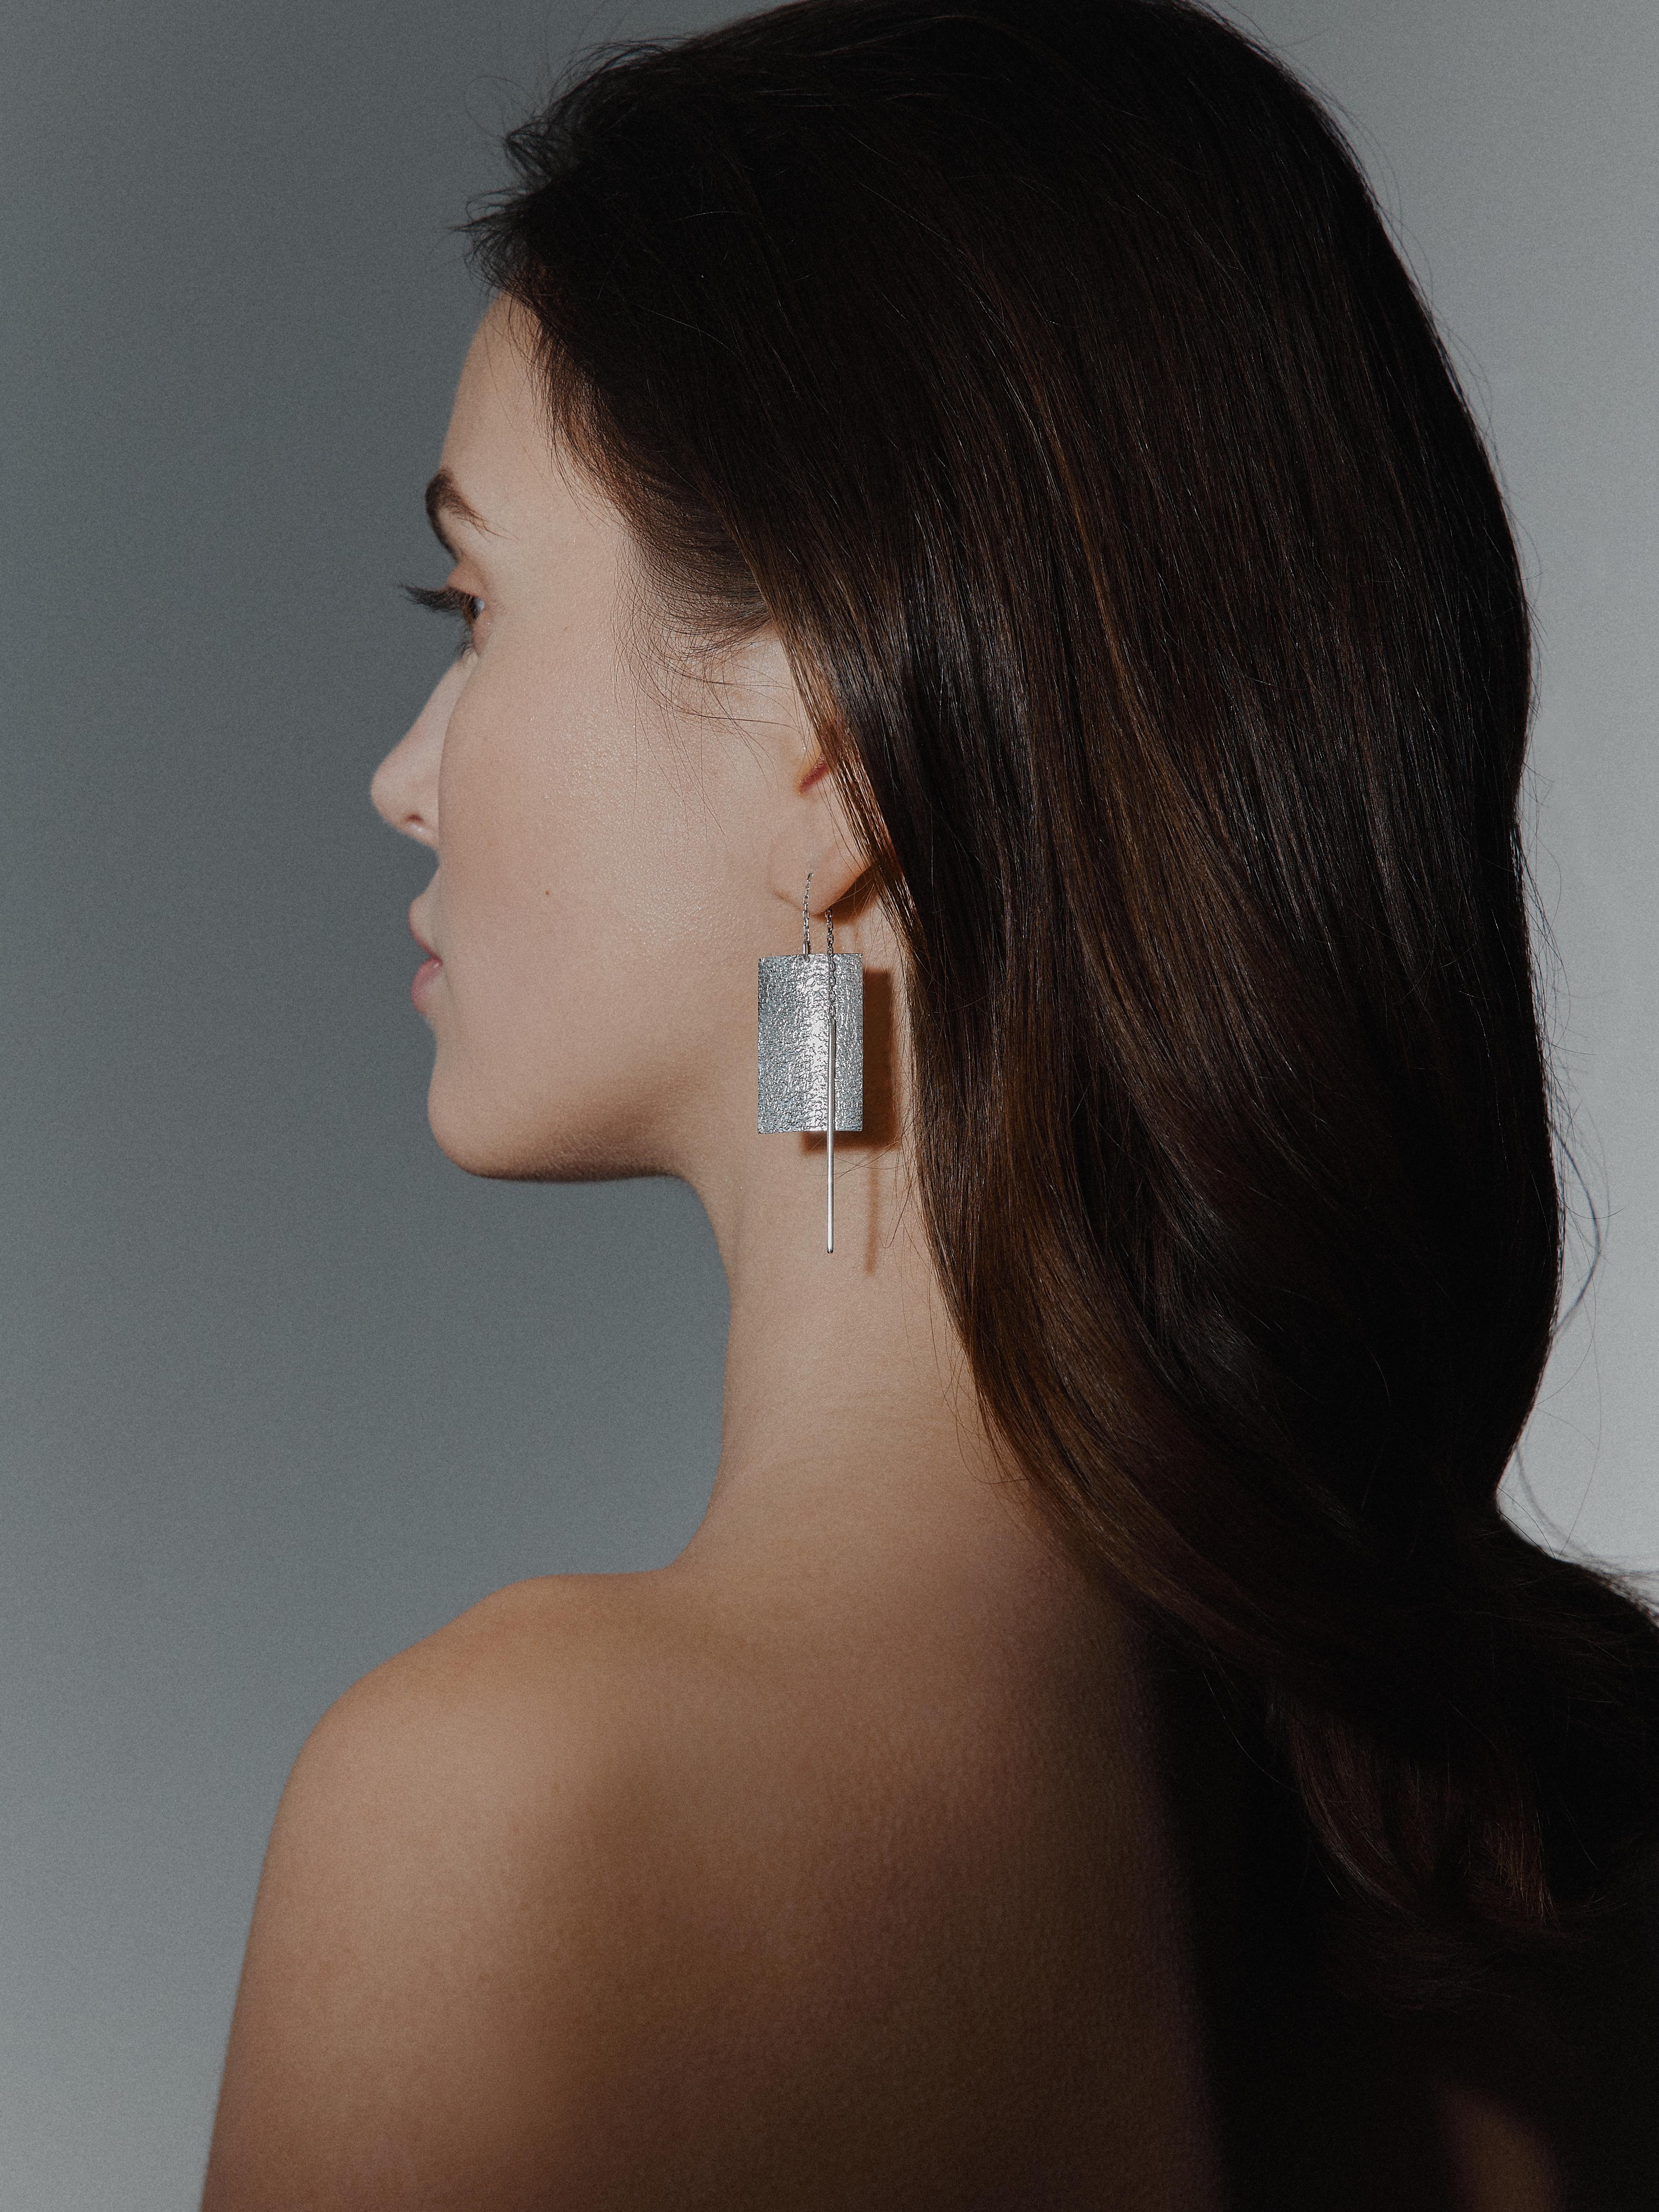 Svitlotin earrings by Svitanok
          
These are objects that are sensitive to the space allocated to them.

Designed by Artem Zakharchenko-Halytskyi, 